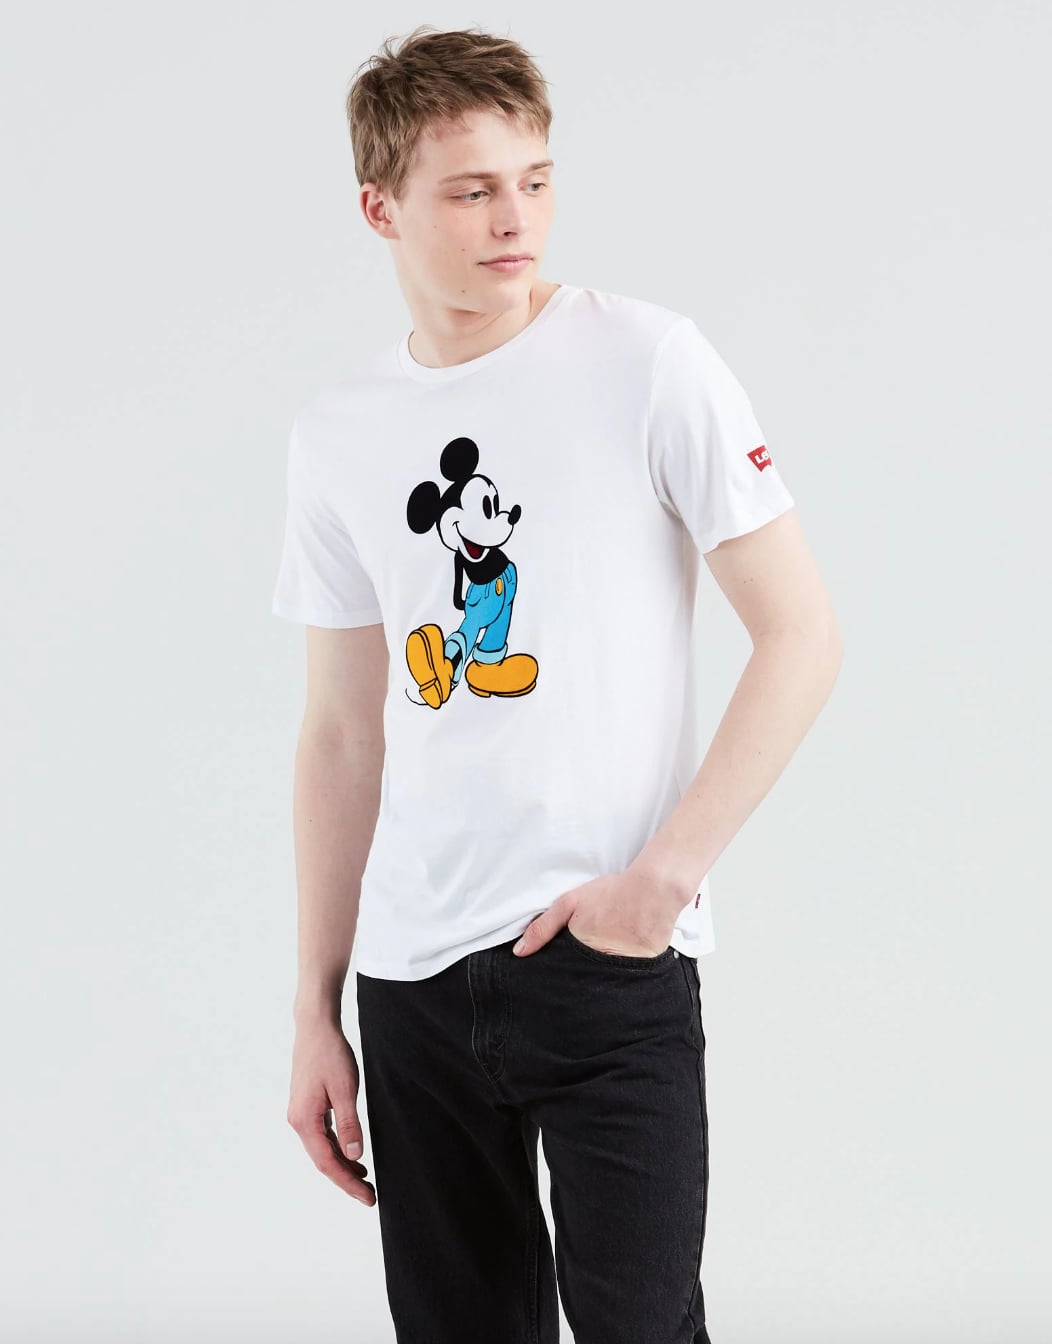 levis mickey mouse hoodie